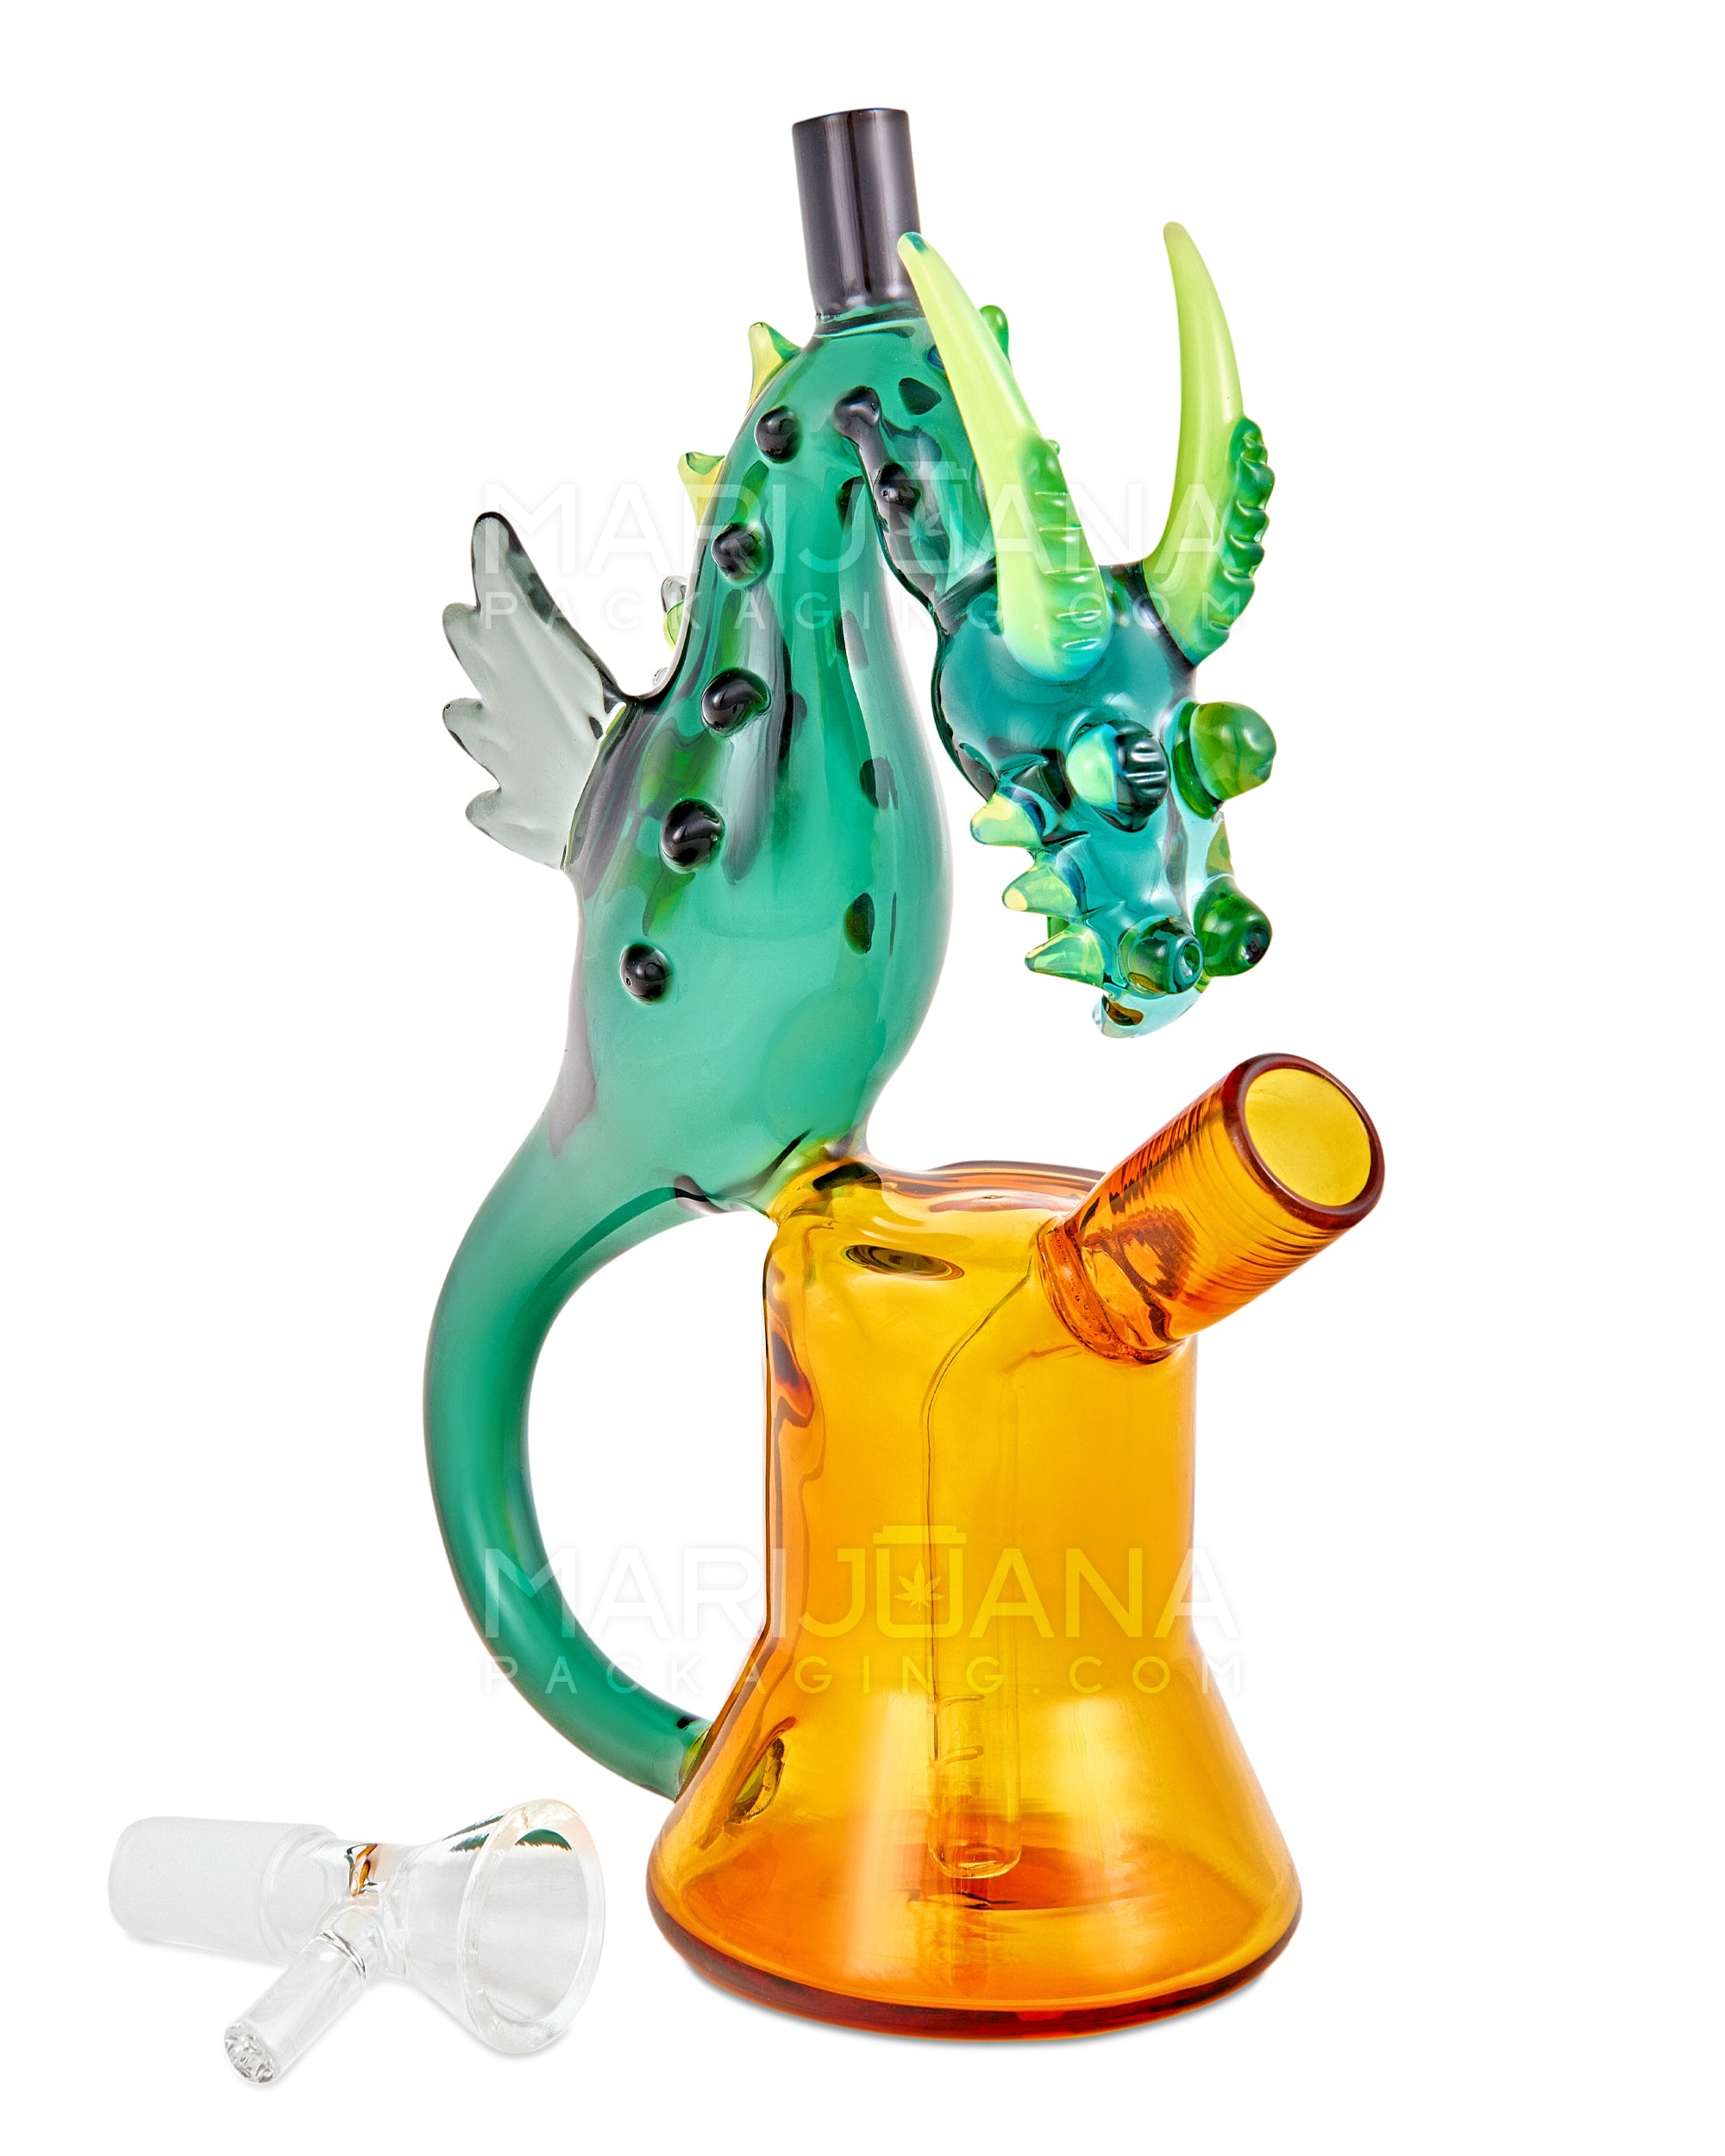 Heady | USA Glass Winged & Horned Glass Dragon Water Pipe w/ Multi Knockers | 7.5in Tall - 14mm Bowl - Teal & Amber - 2